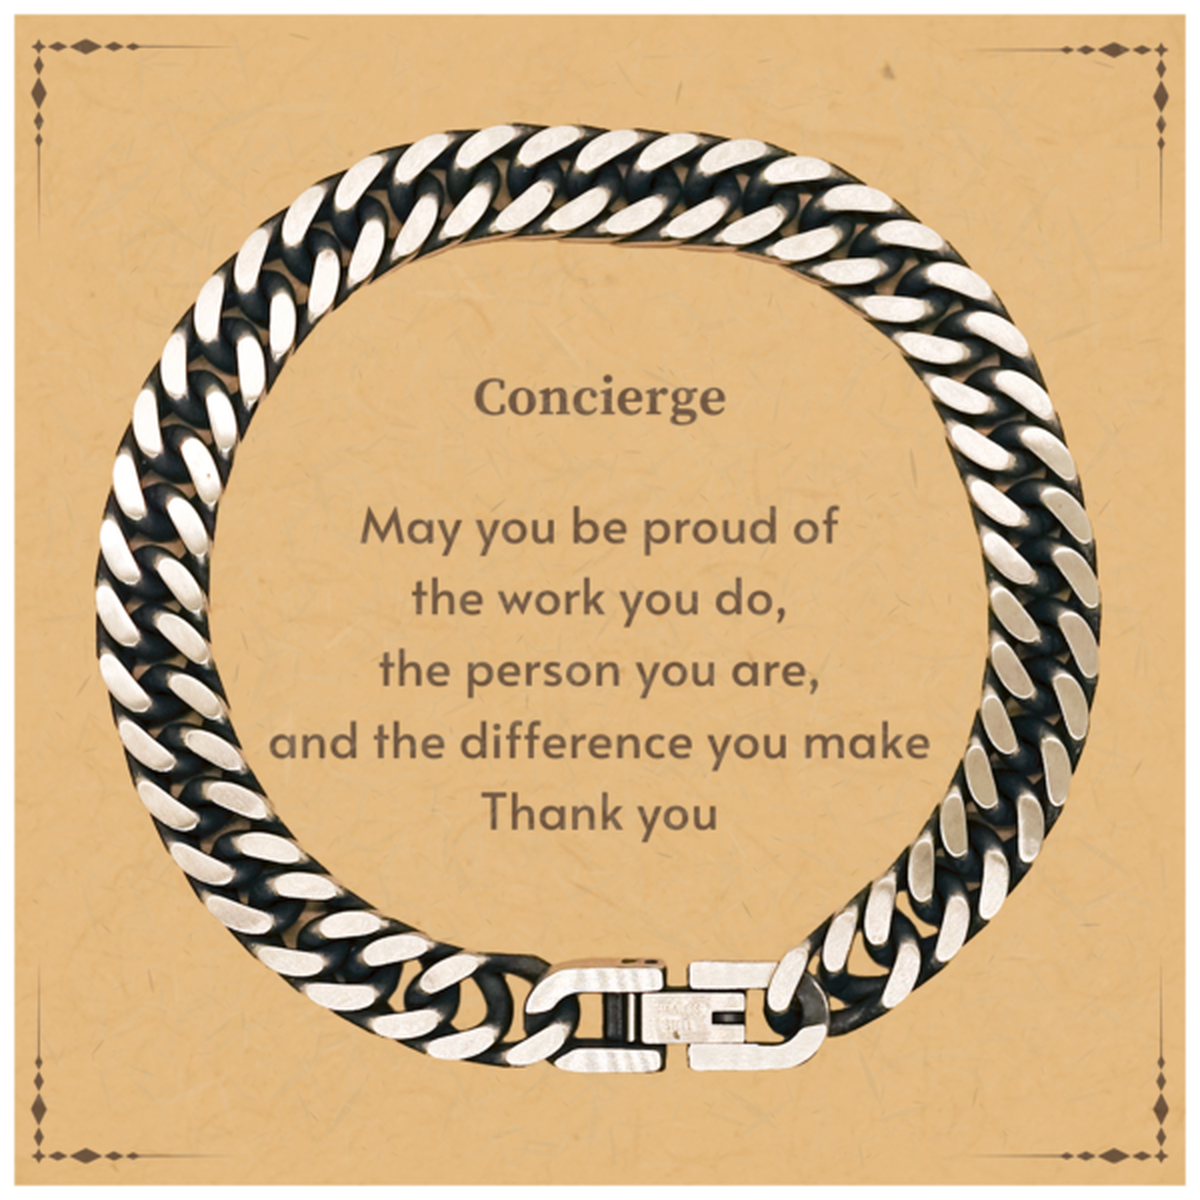 Heartwarming Cuban Link Chain Bracelet Retirement Coworkers Gifts for Concierge, Concierge May You be proud of the work you do, the person you are Gifts for Boss Men Women Friends